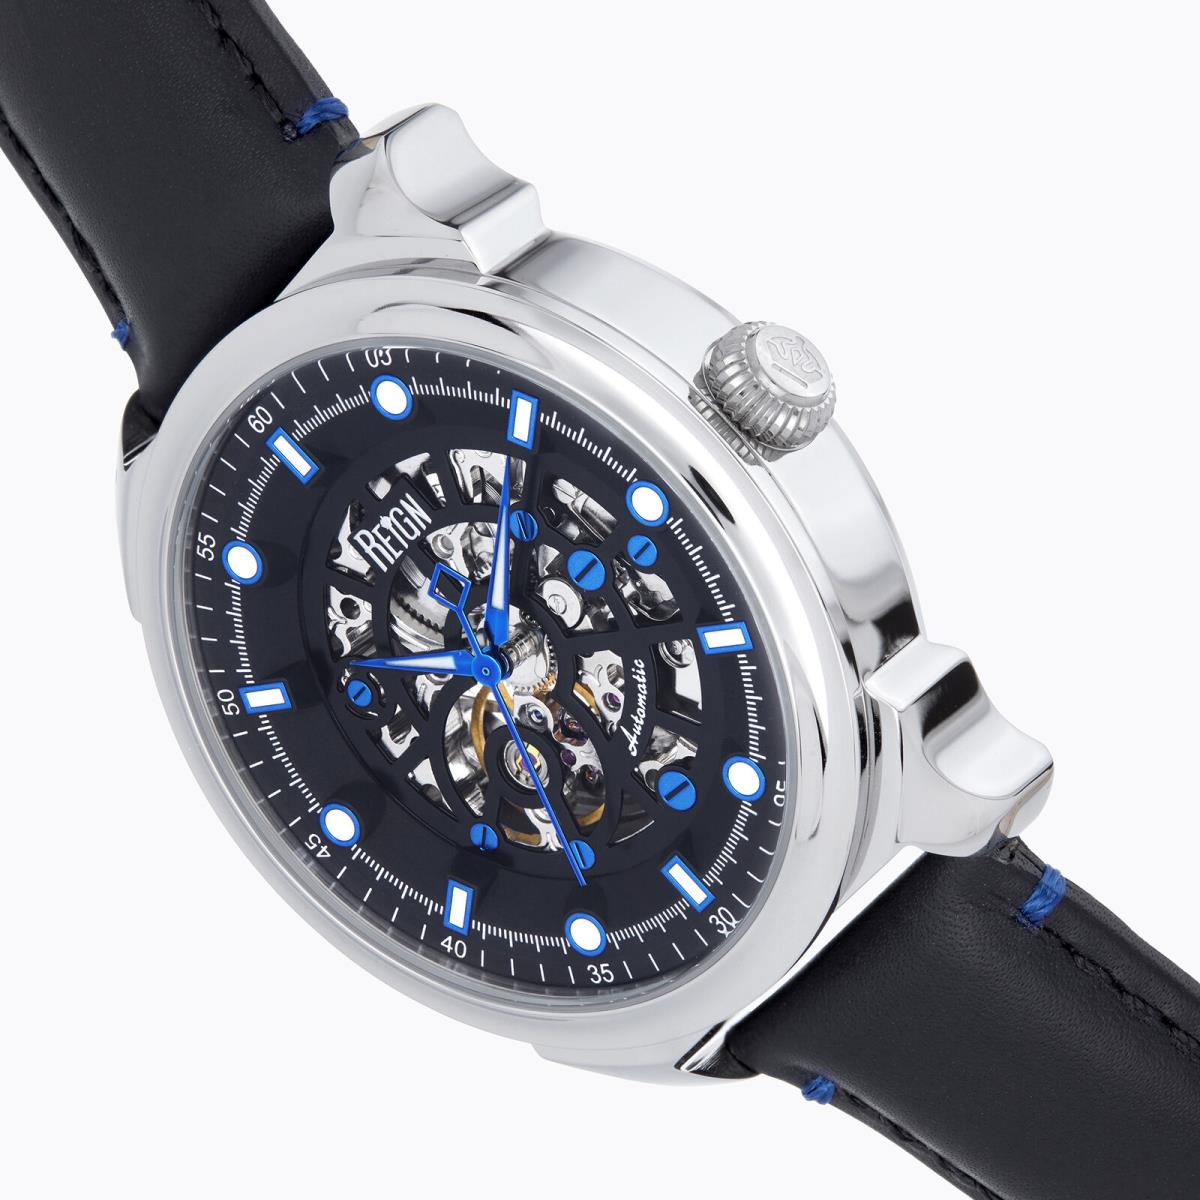 Reign Weston Automatic Skeletonized Leather-band Watch - Silver/black